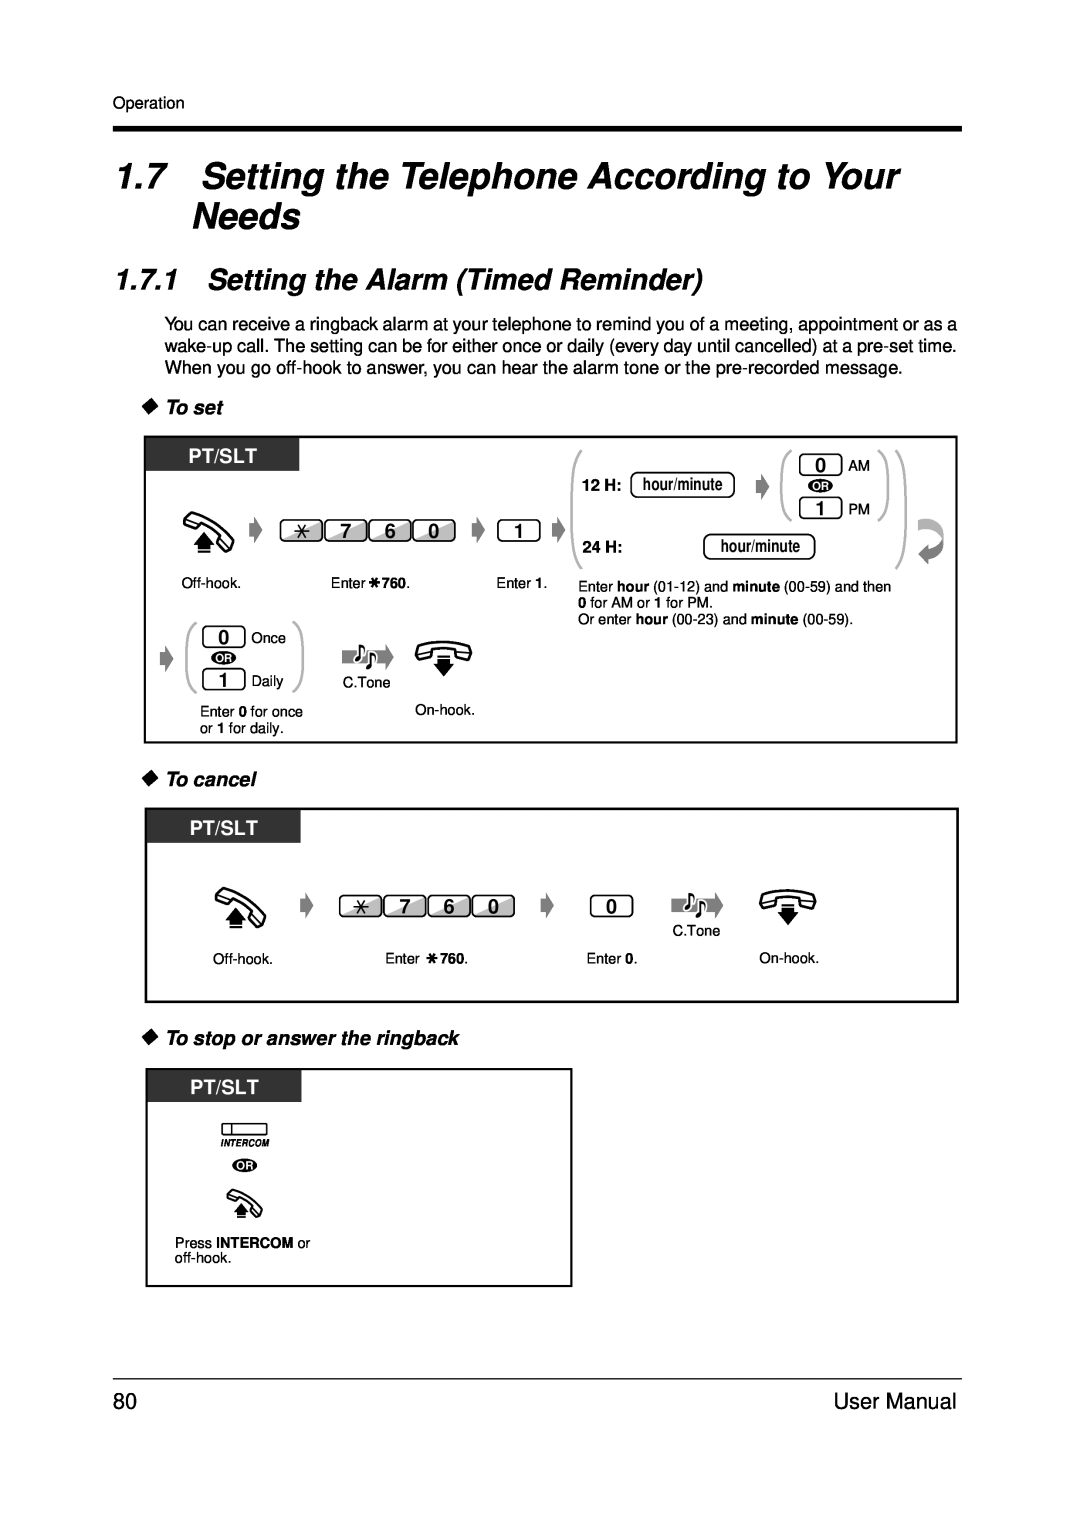 Panasonic KX-TDA200 1.7Setting the Telephone According to Your Needs, 1.7.1Setting the Alarm Timed Reminder, To set 